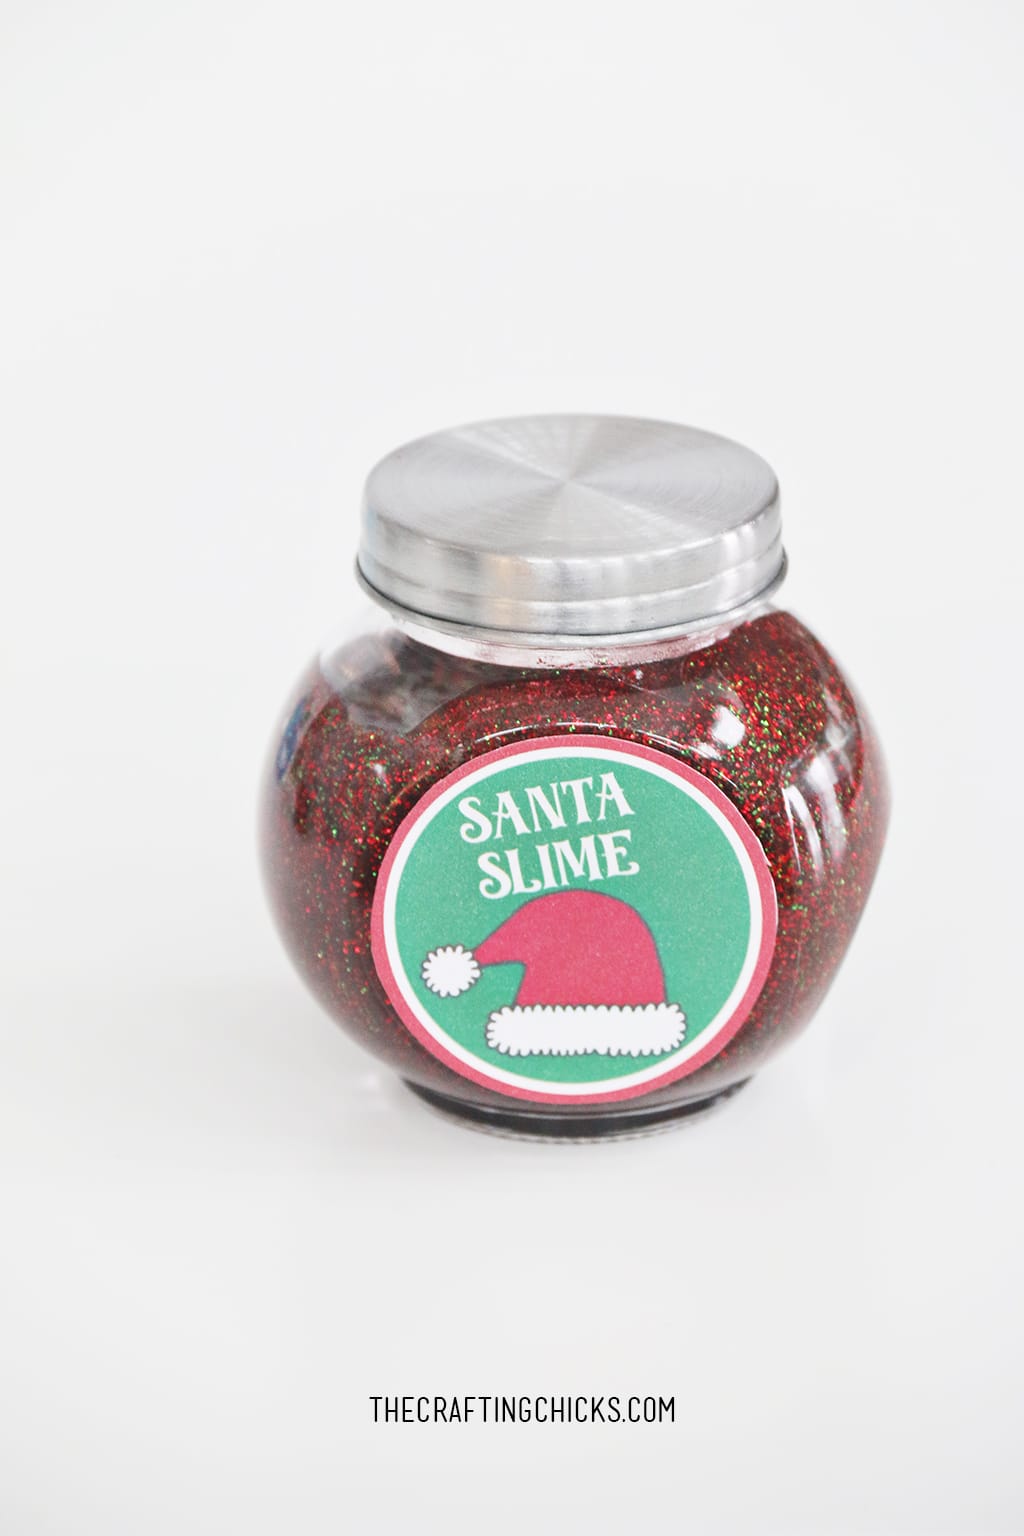 Santa Slime in a small glass jar with lid